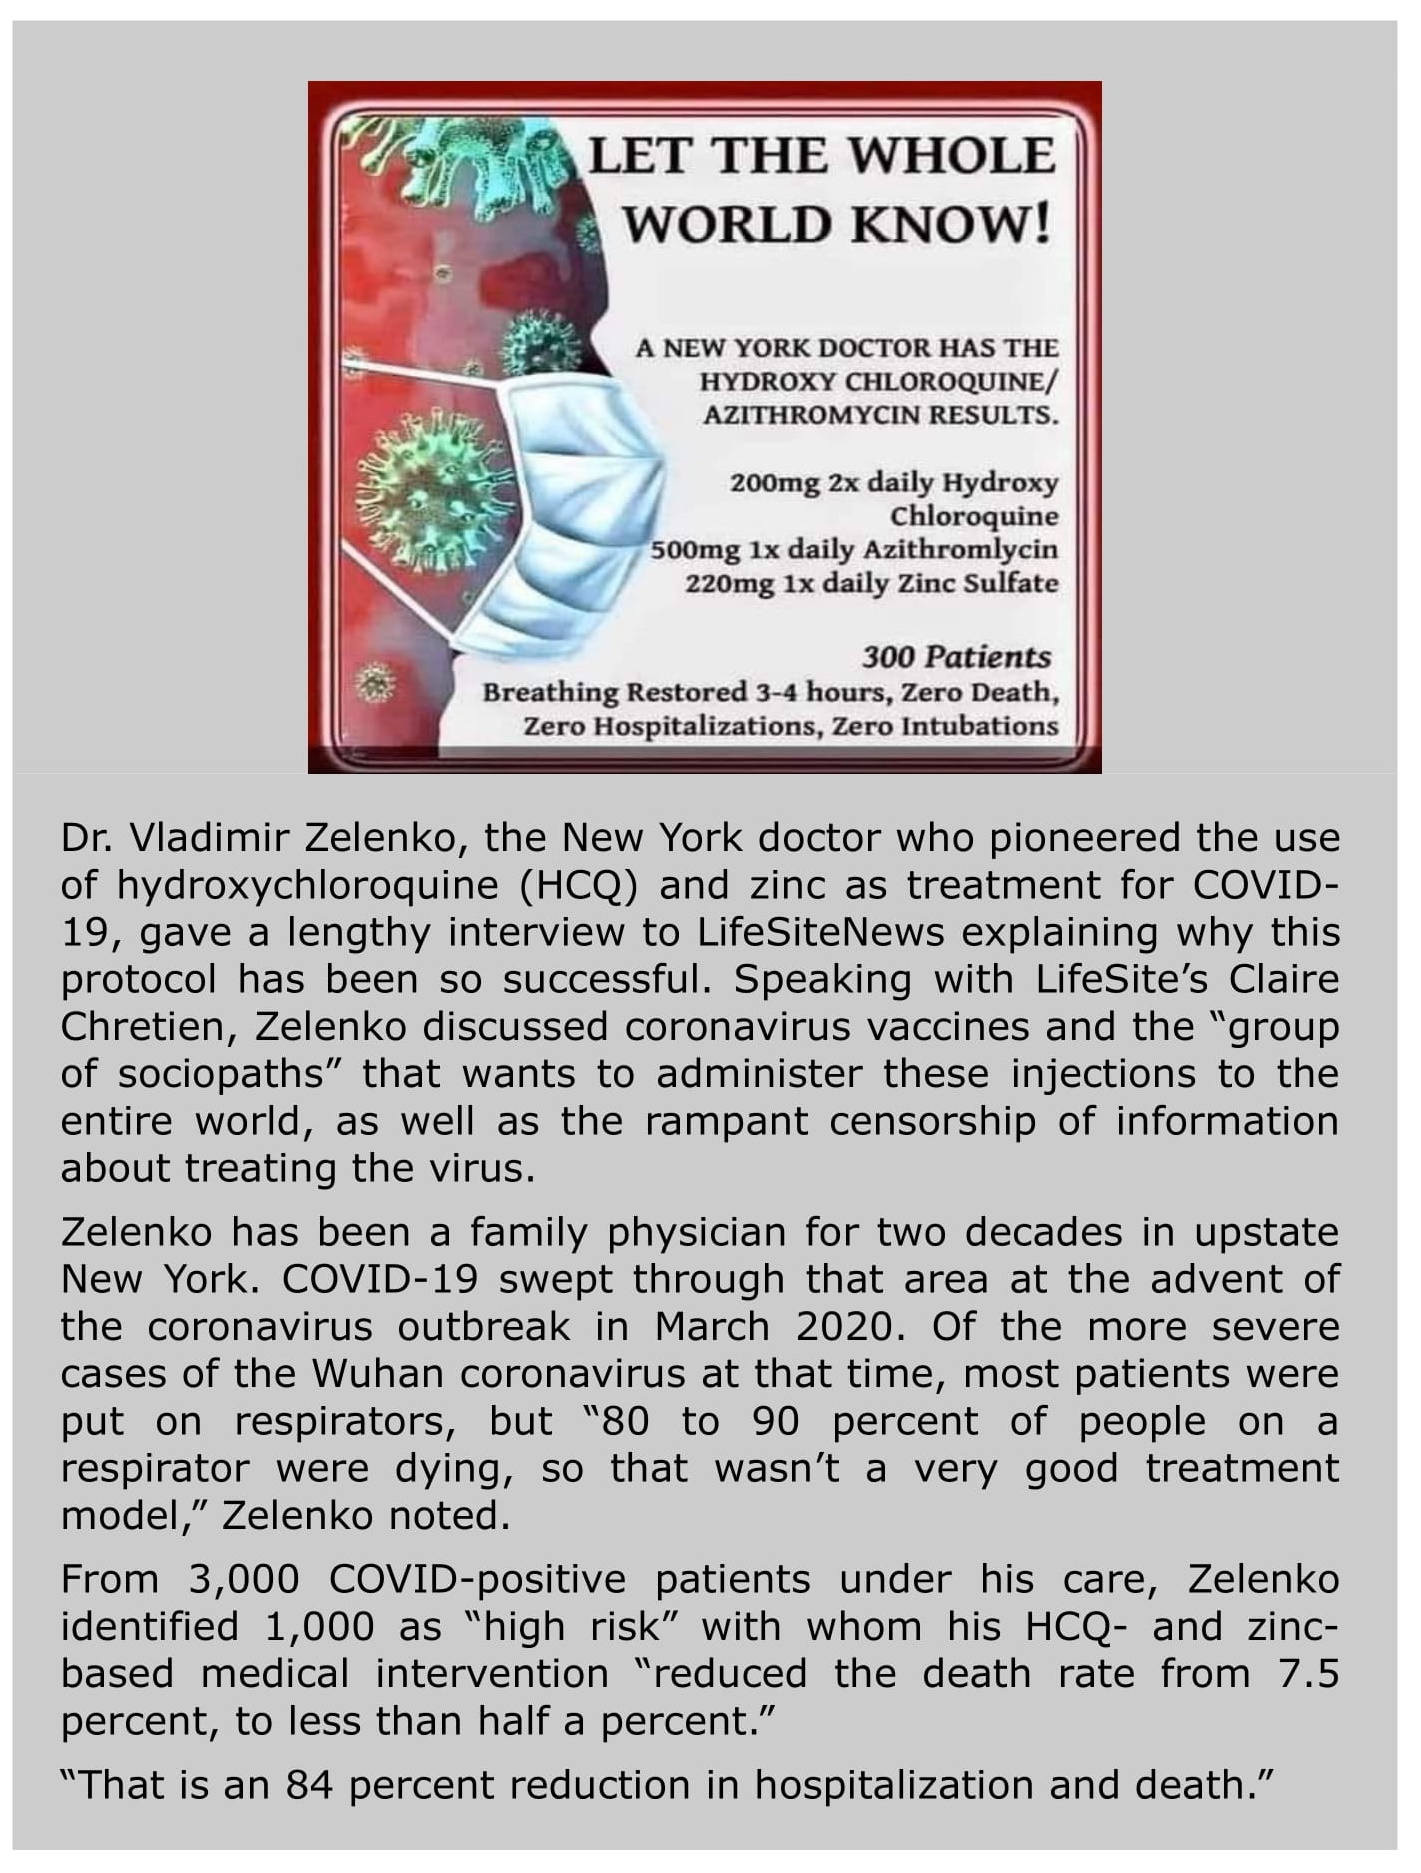 Let the World Know - Treatment for Covid